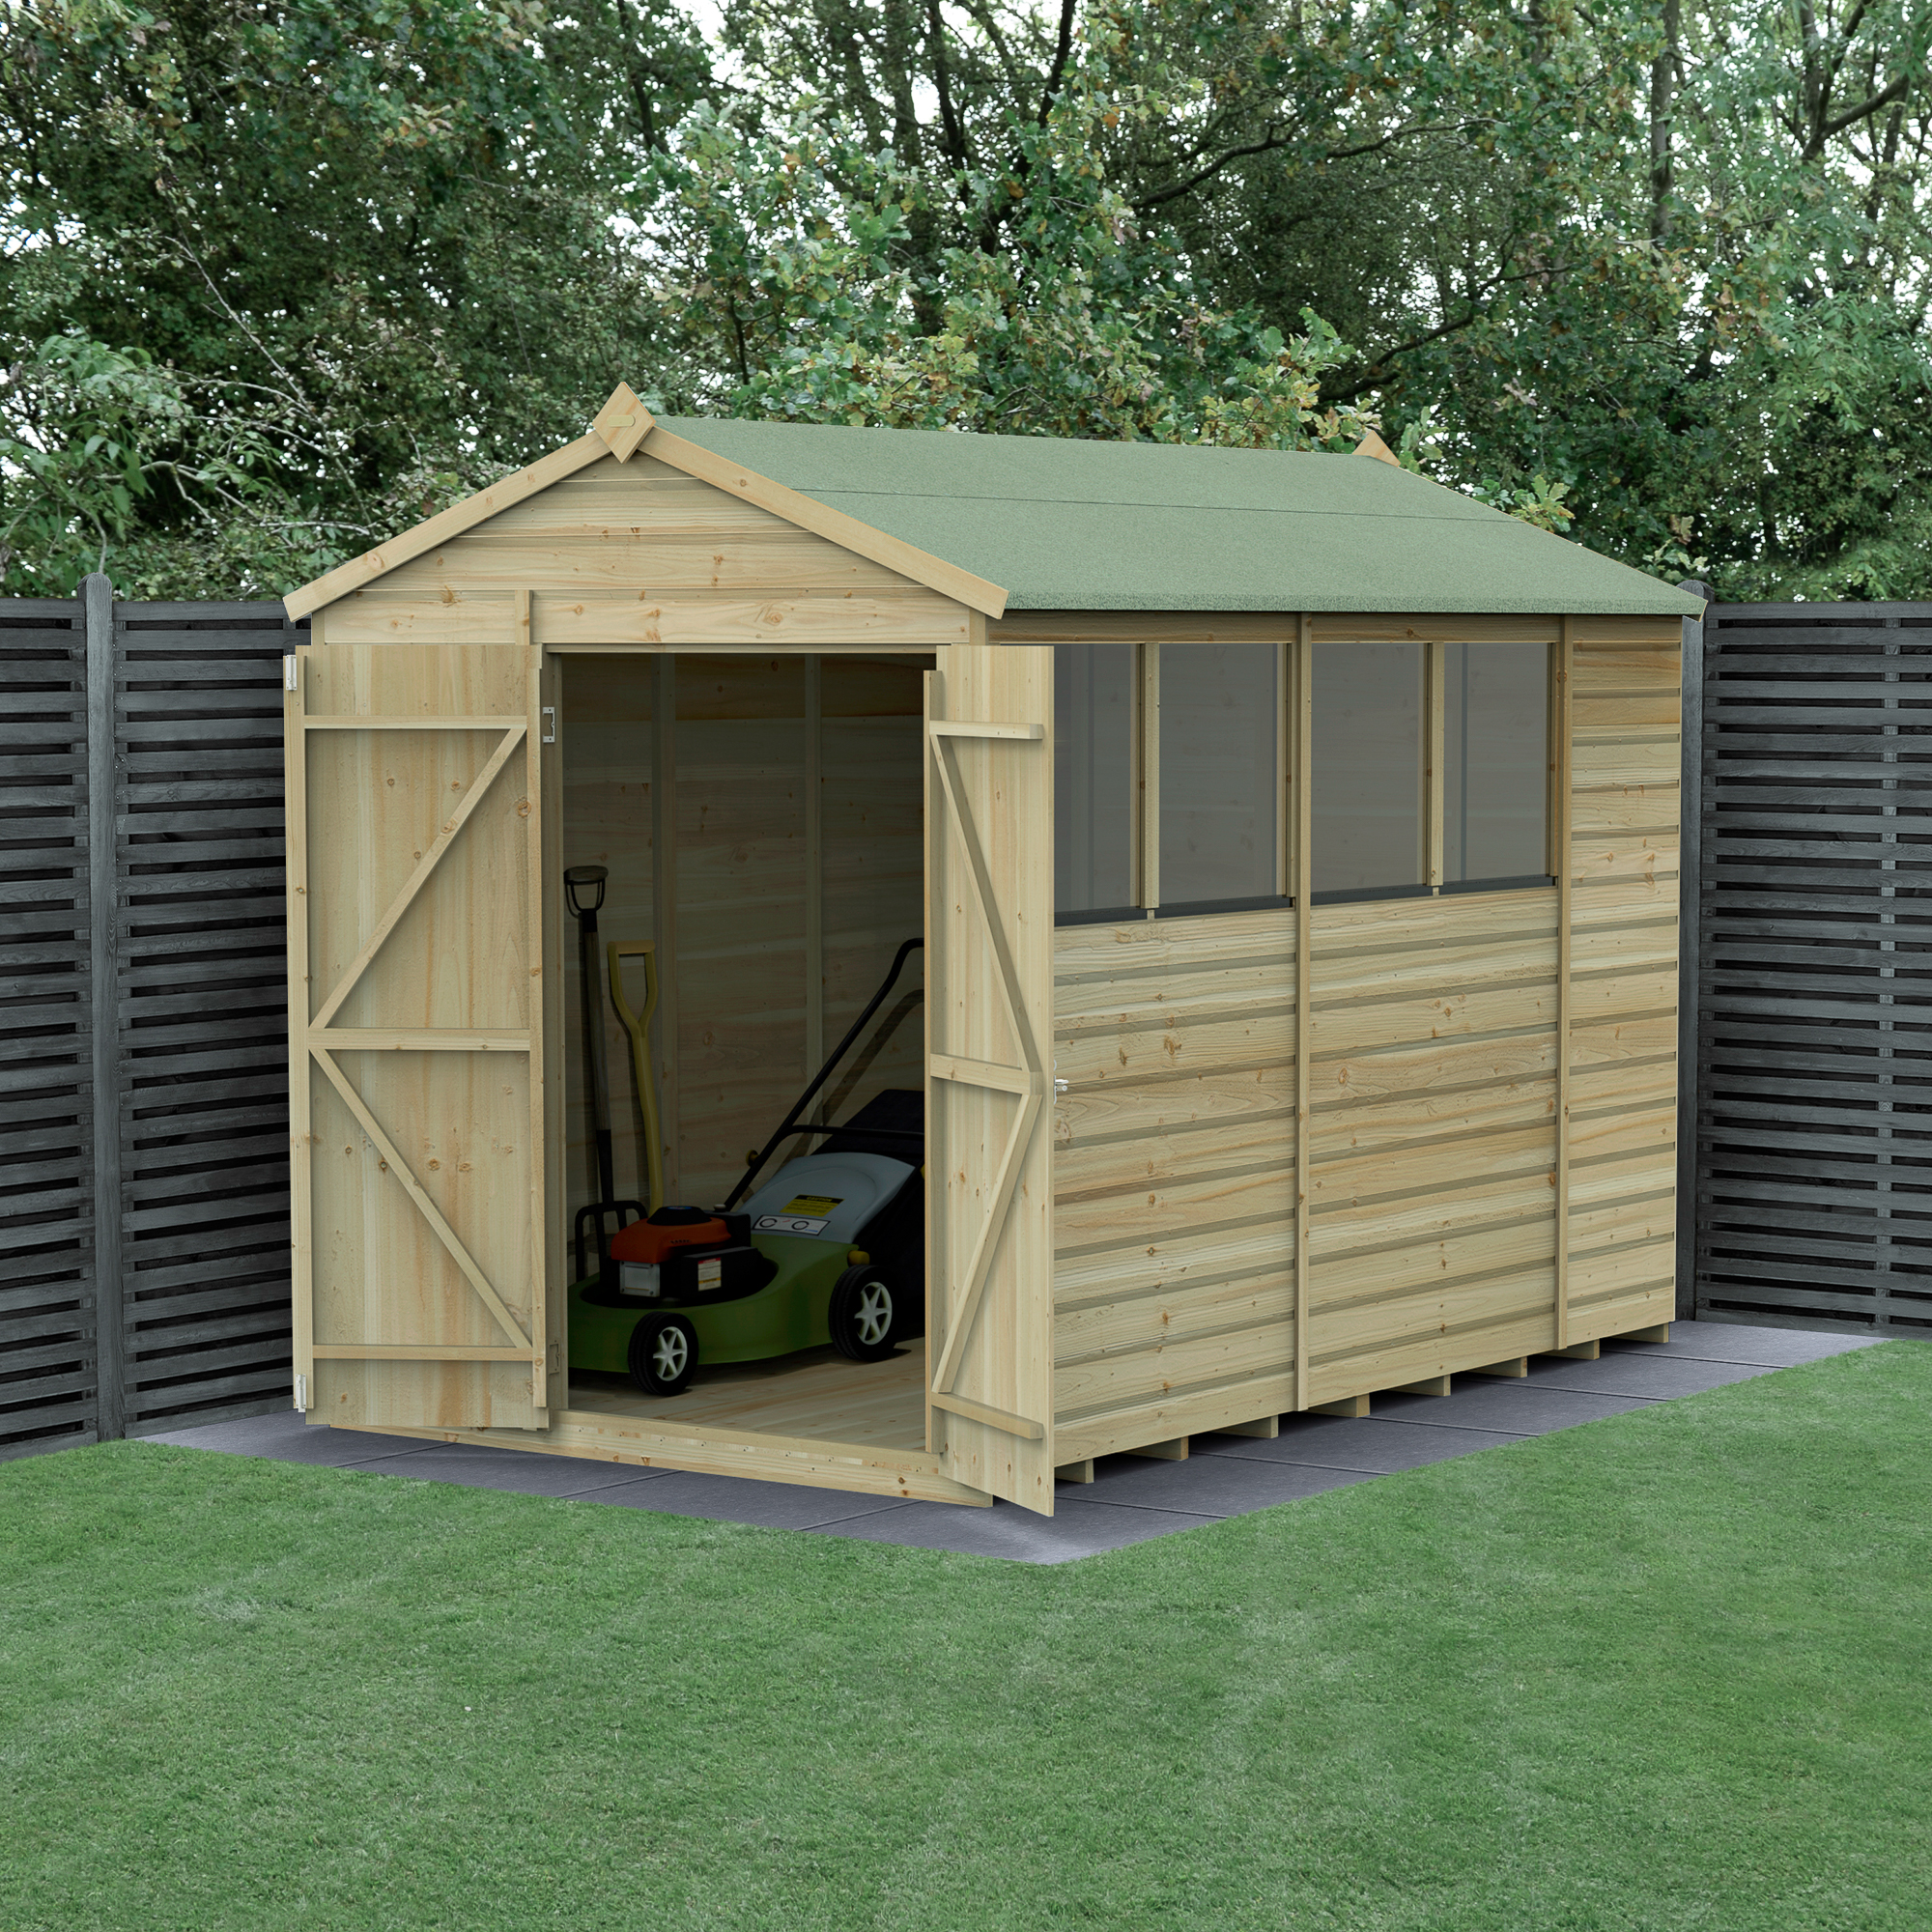 Forest Garden Beckwood 6 x 10ft Apex Shiplap Pressure Treated Double Door Shed with Base